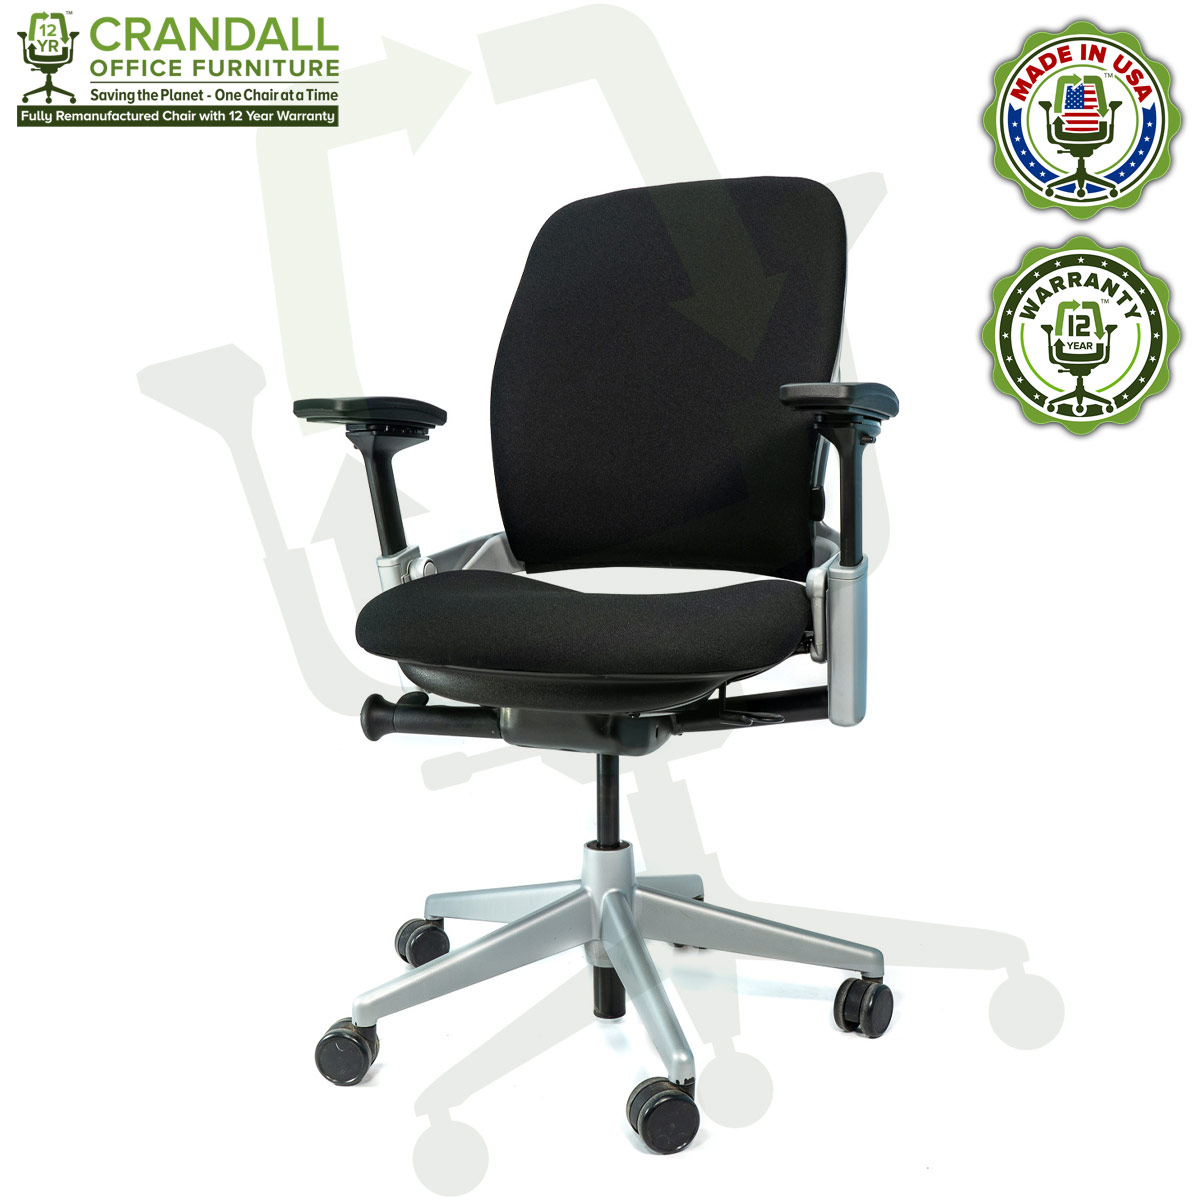 Crandall Office Furniture Remanufactured Steelcase V2 Leap Chair - Platinum Frame 03